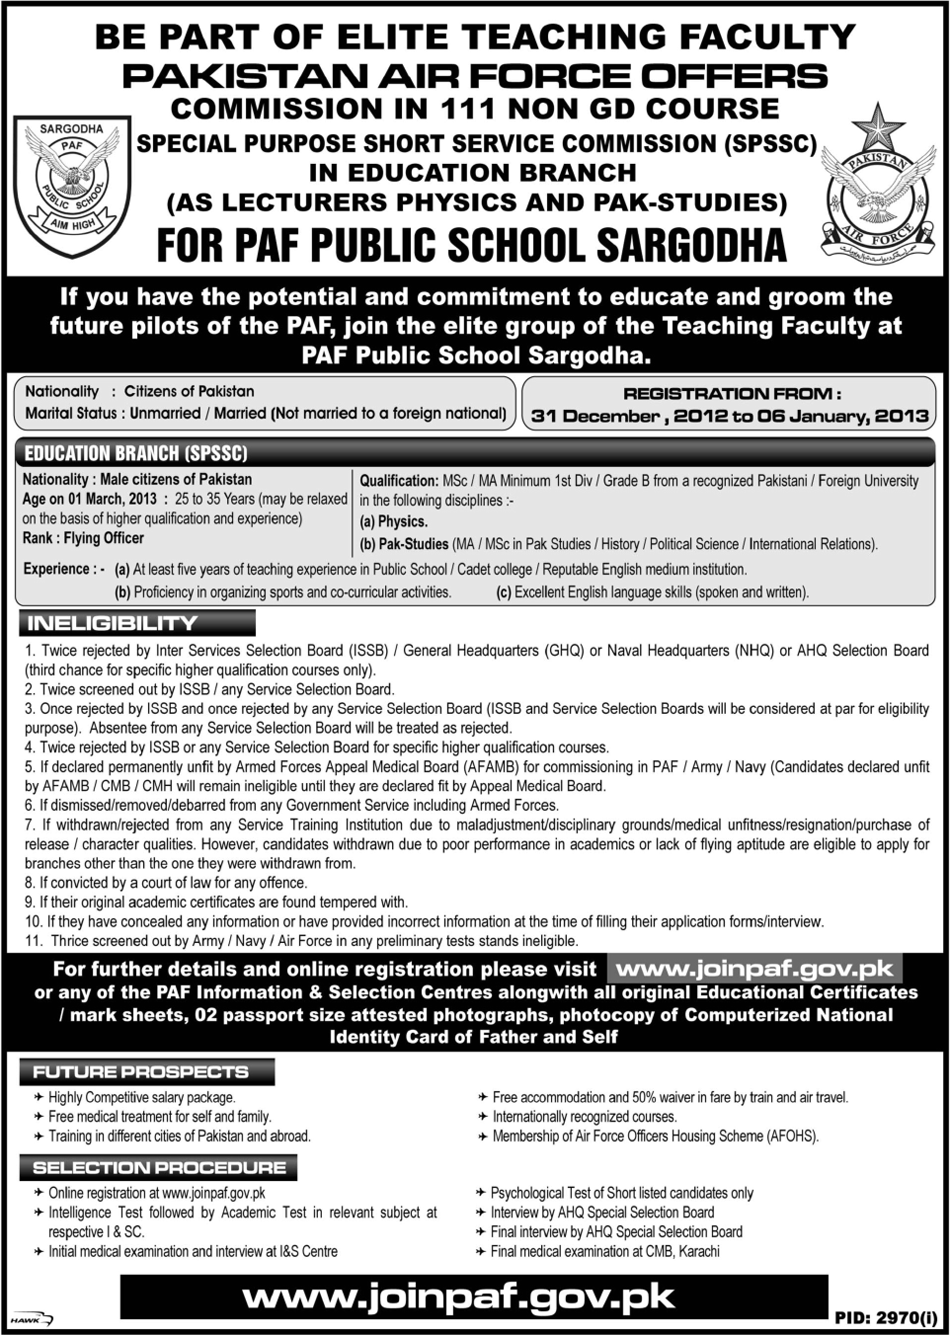 Join PAF as Lecturer 2013 SPSSC in Education Branch Commission in 111 Non GD Course